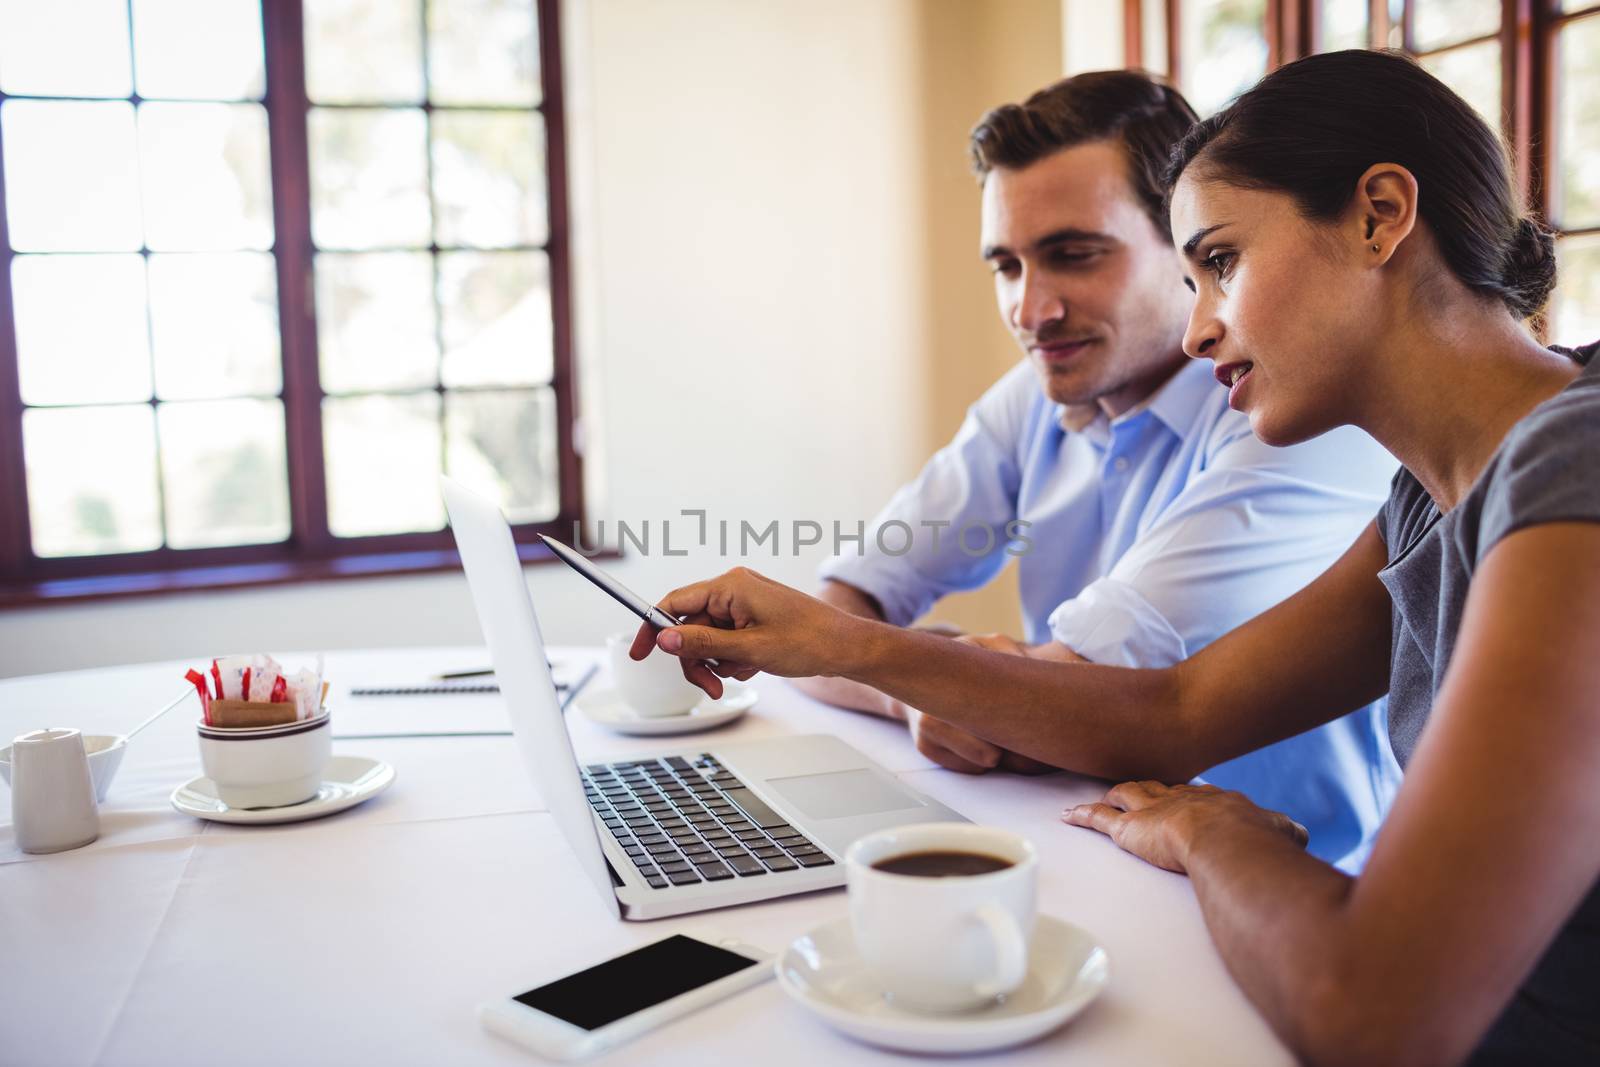 Business people discussing on laptop in restaurant